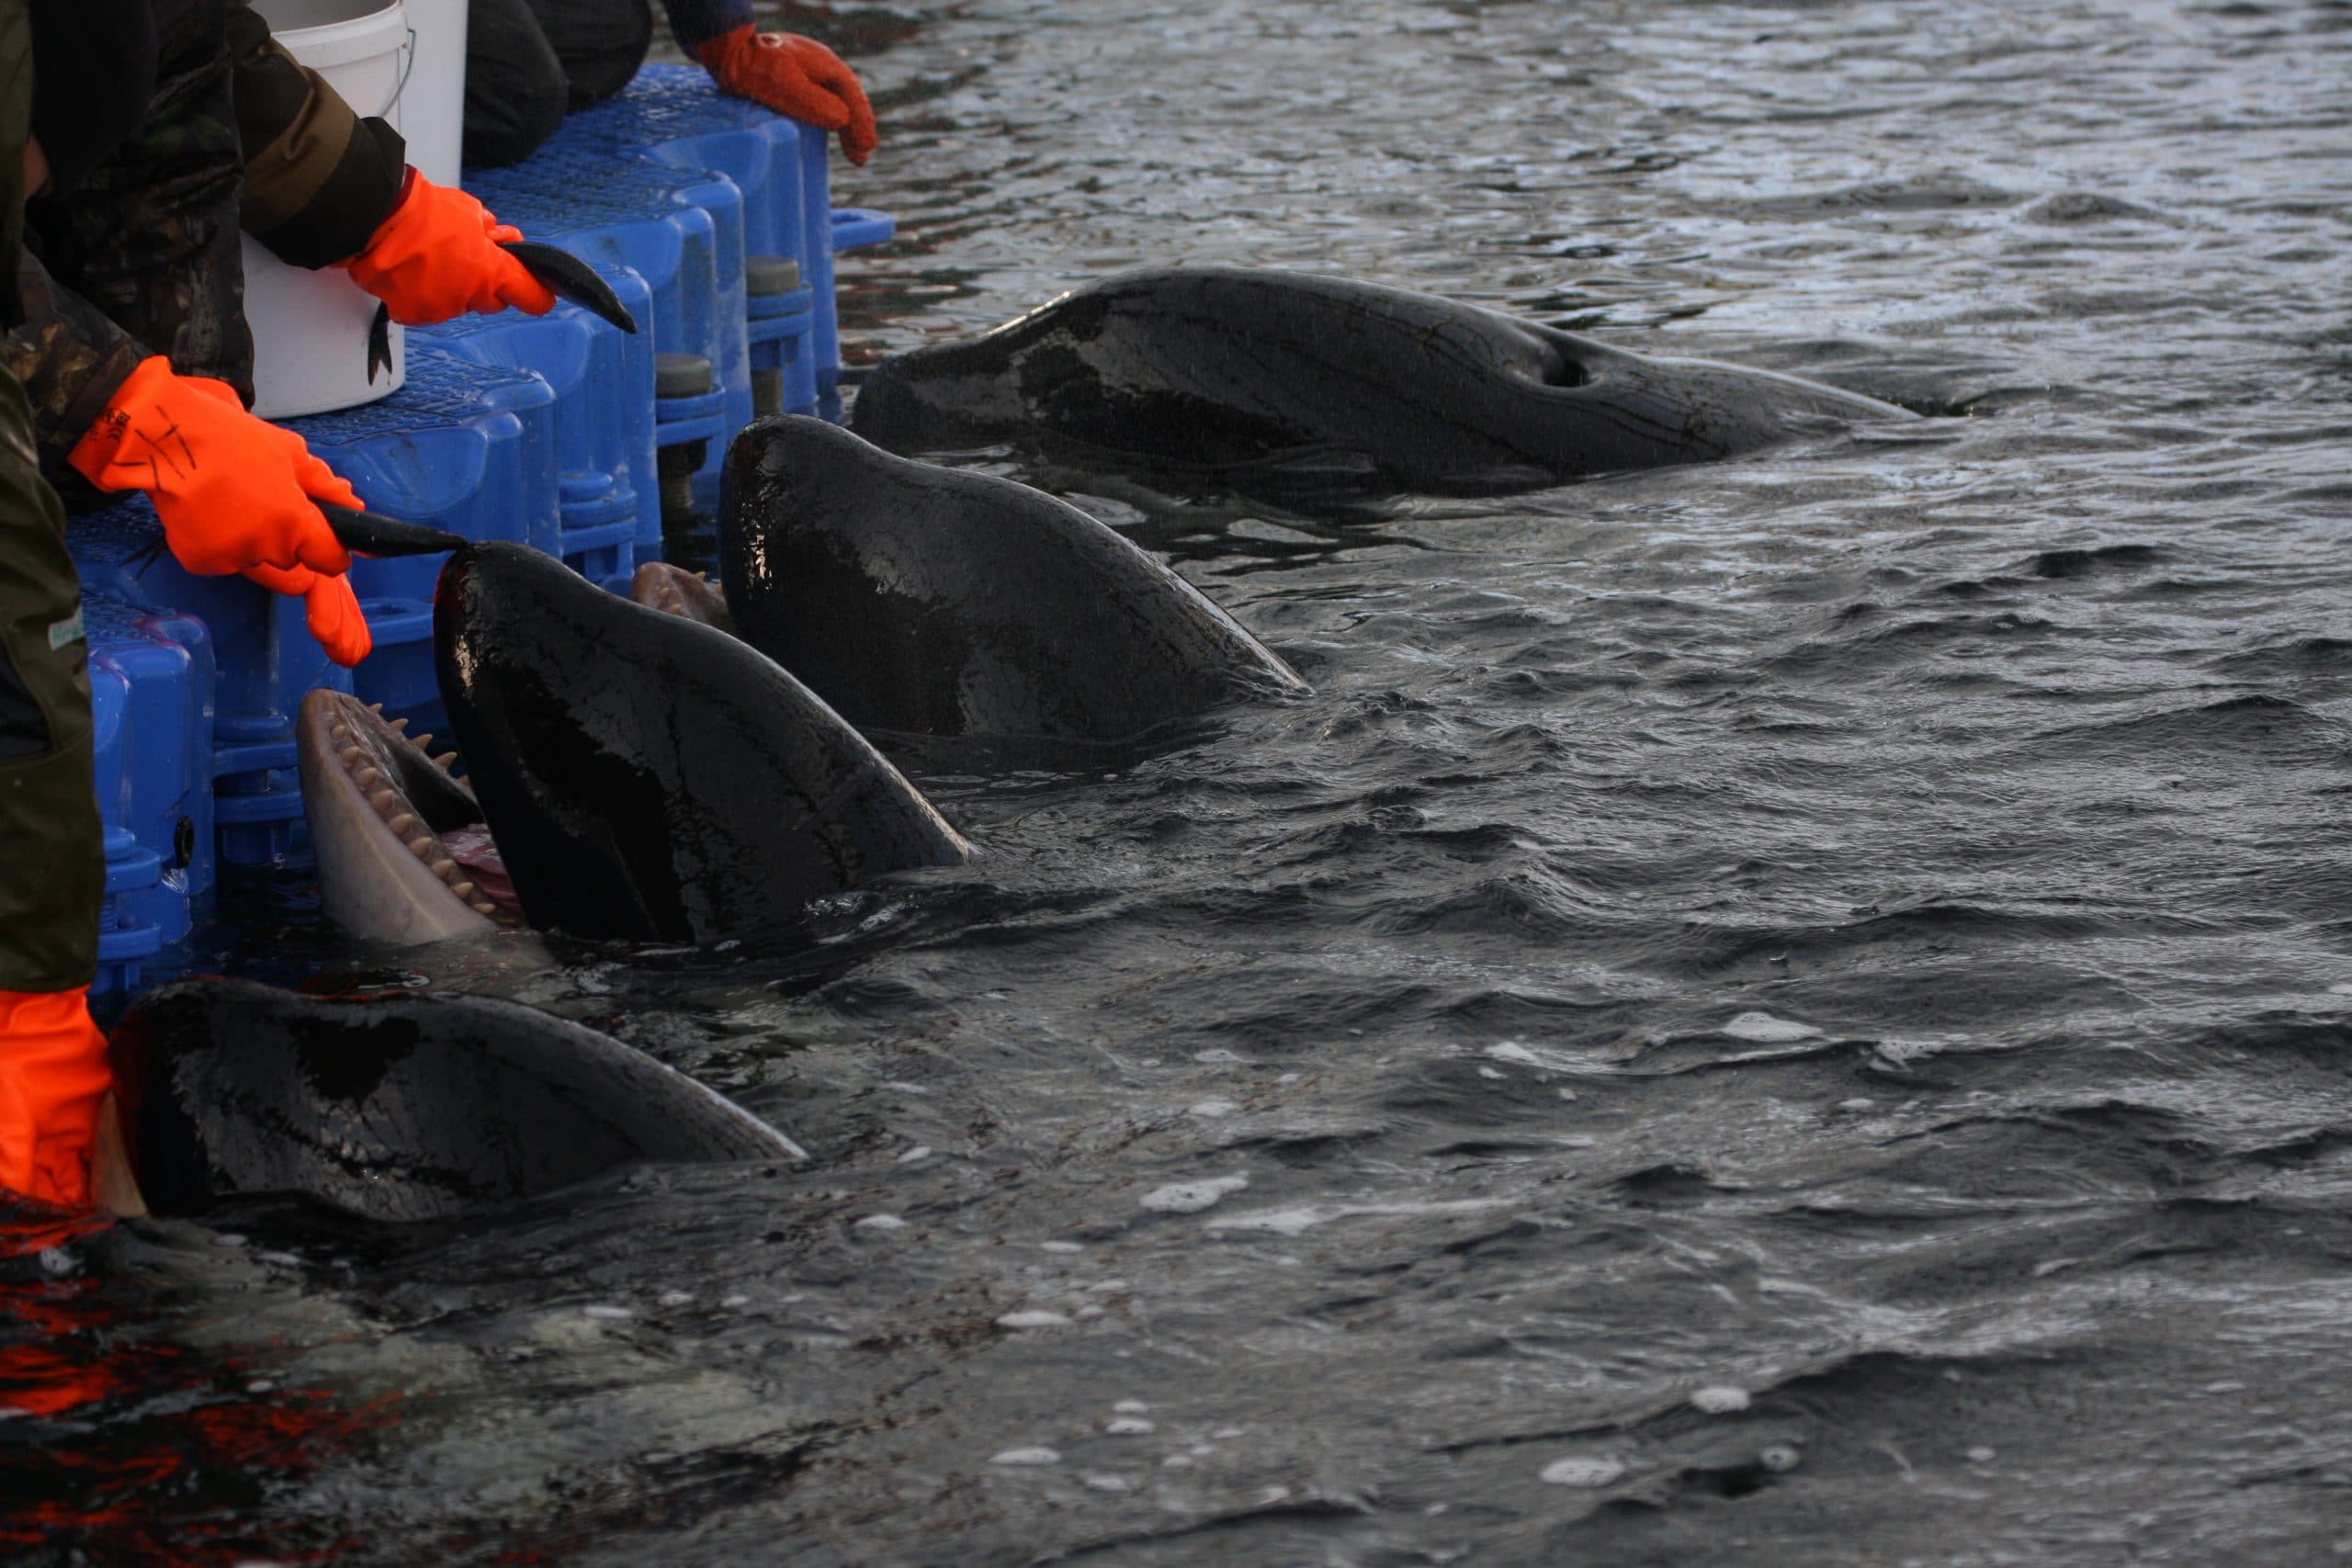 Orcas are crammed together in sickening conditions